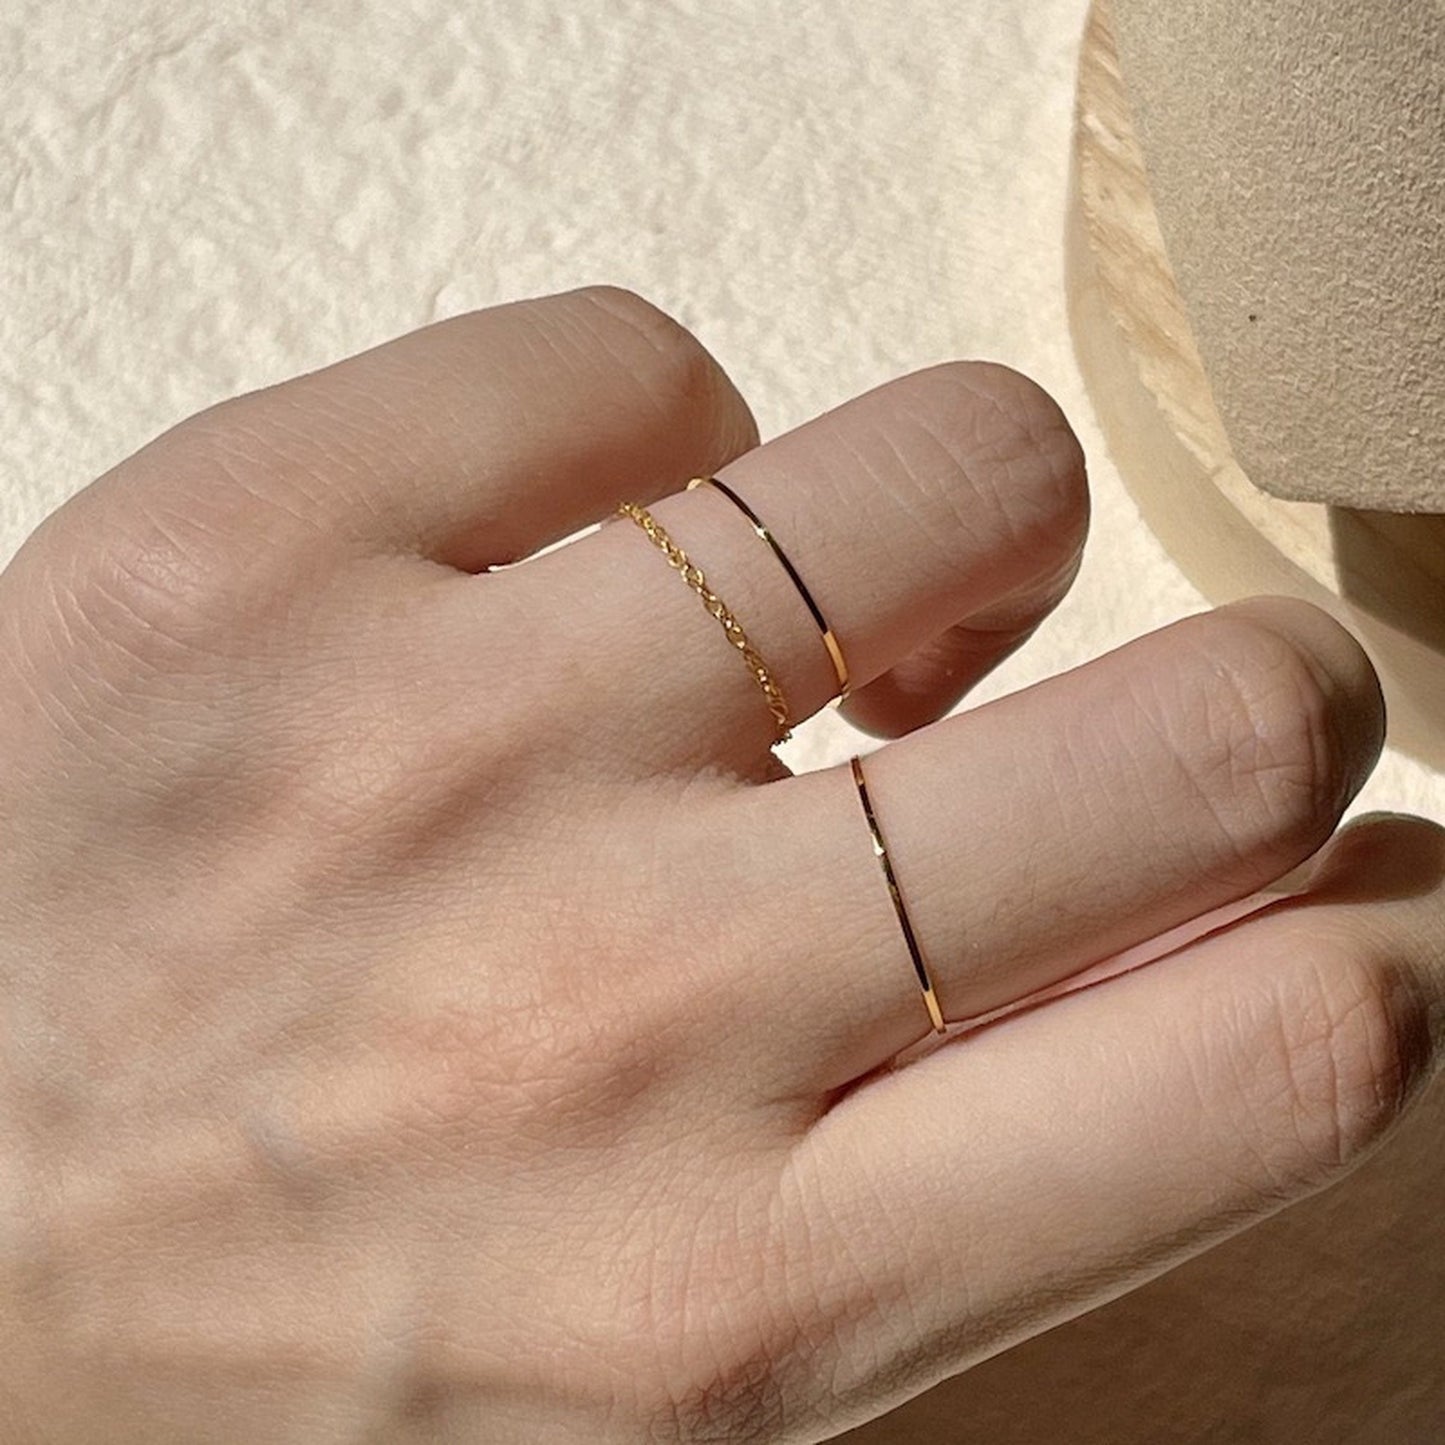 0.5mm Hammered Ultra thin Ring, 14K Gold-filled Stacking Rings, Simple Band Rings, Midi Ring, Knuckle Rings, Dainty Delicate Minimalist Ring